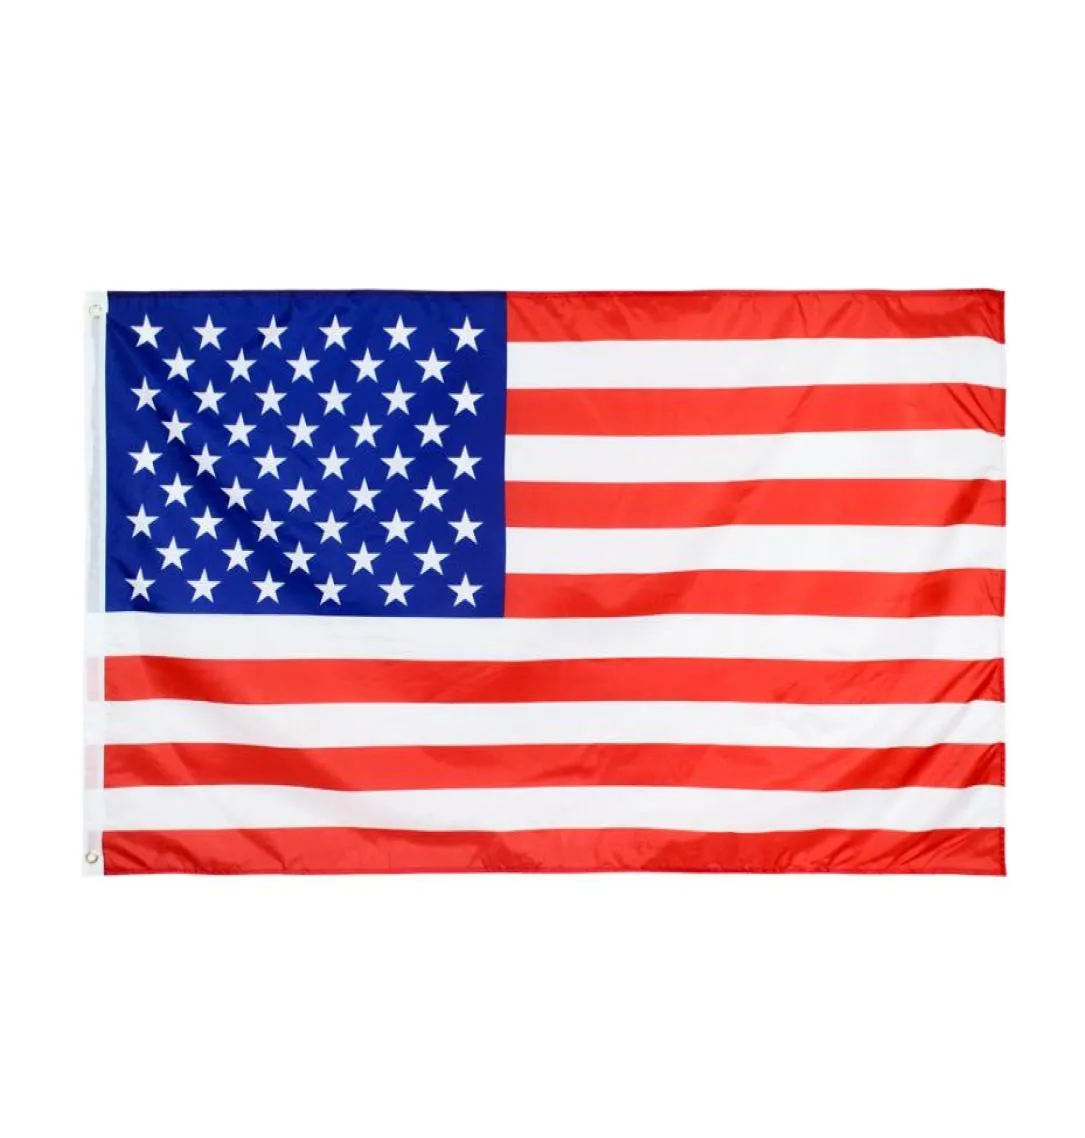 Stars Stripes United States US American Flag Of USA Direct Factory Whole 3x5Fts 90x150cm Retail Indoor Outdoor Usage7184879